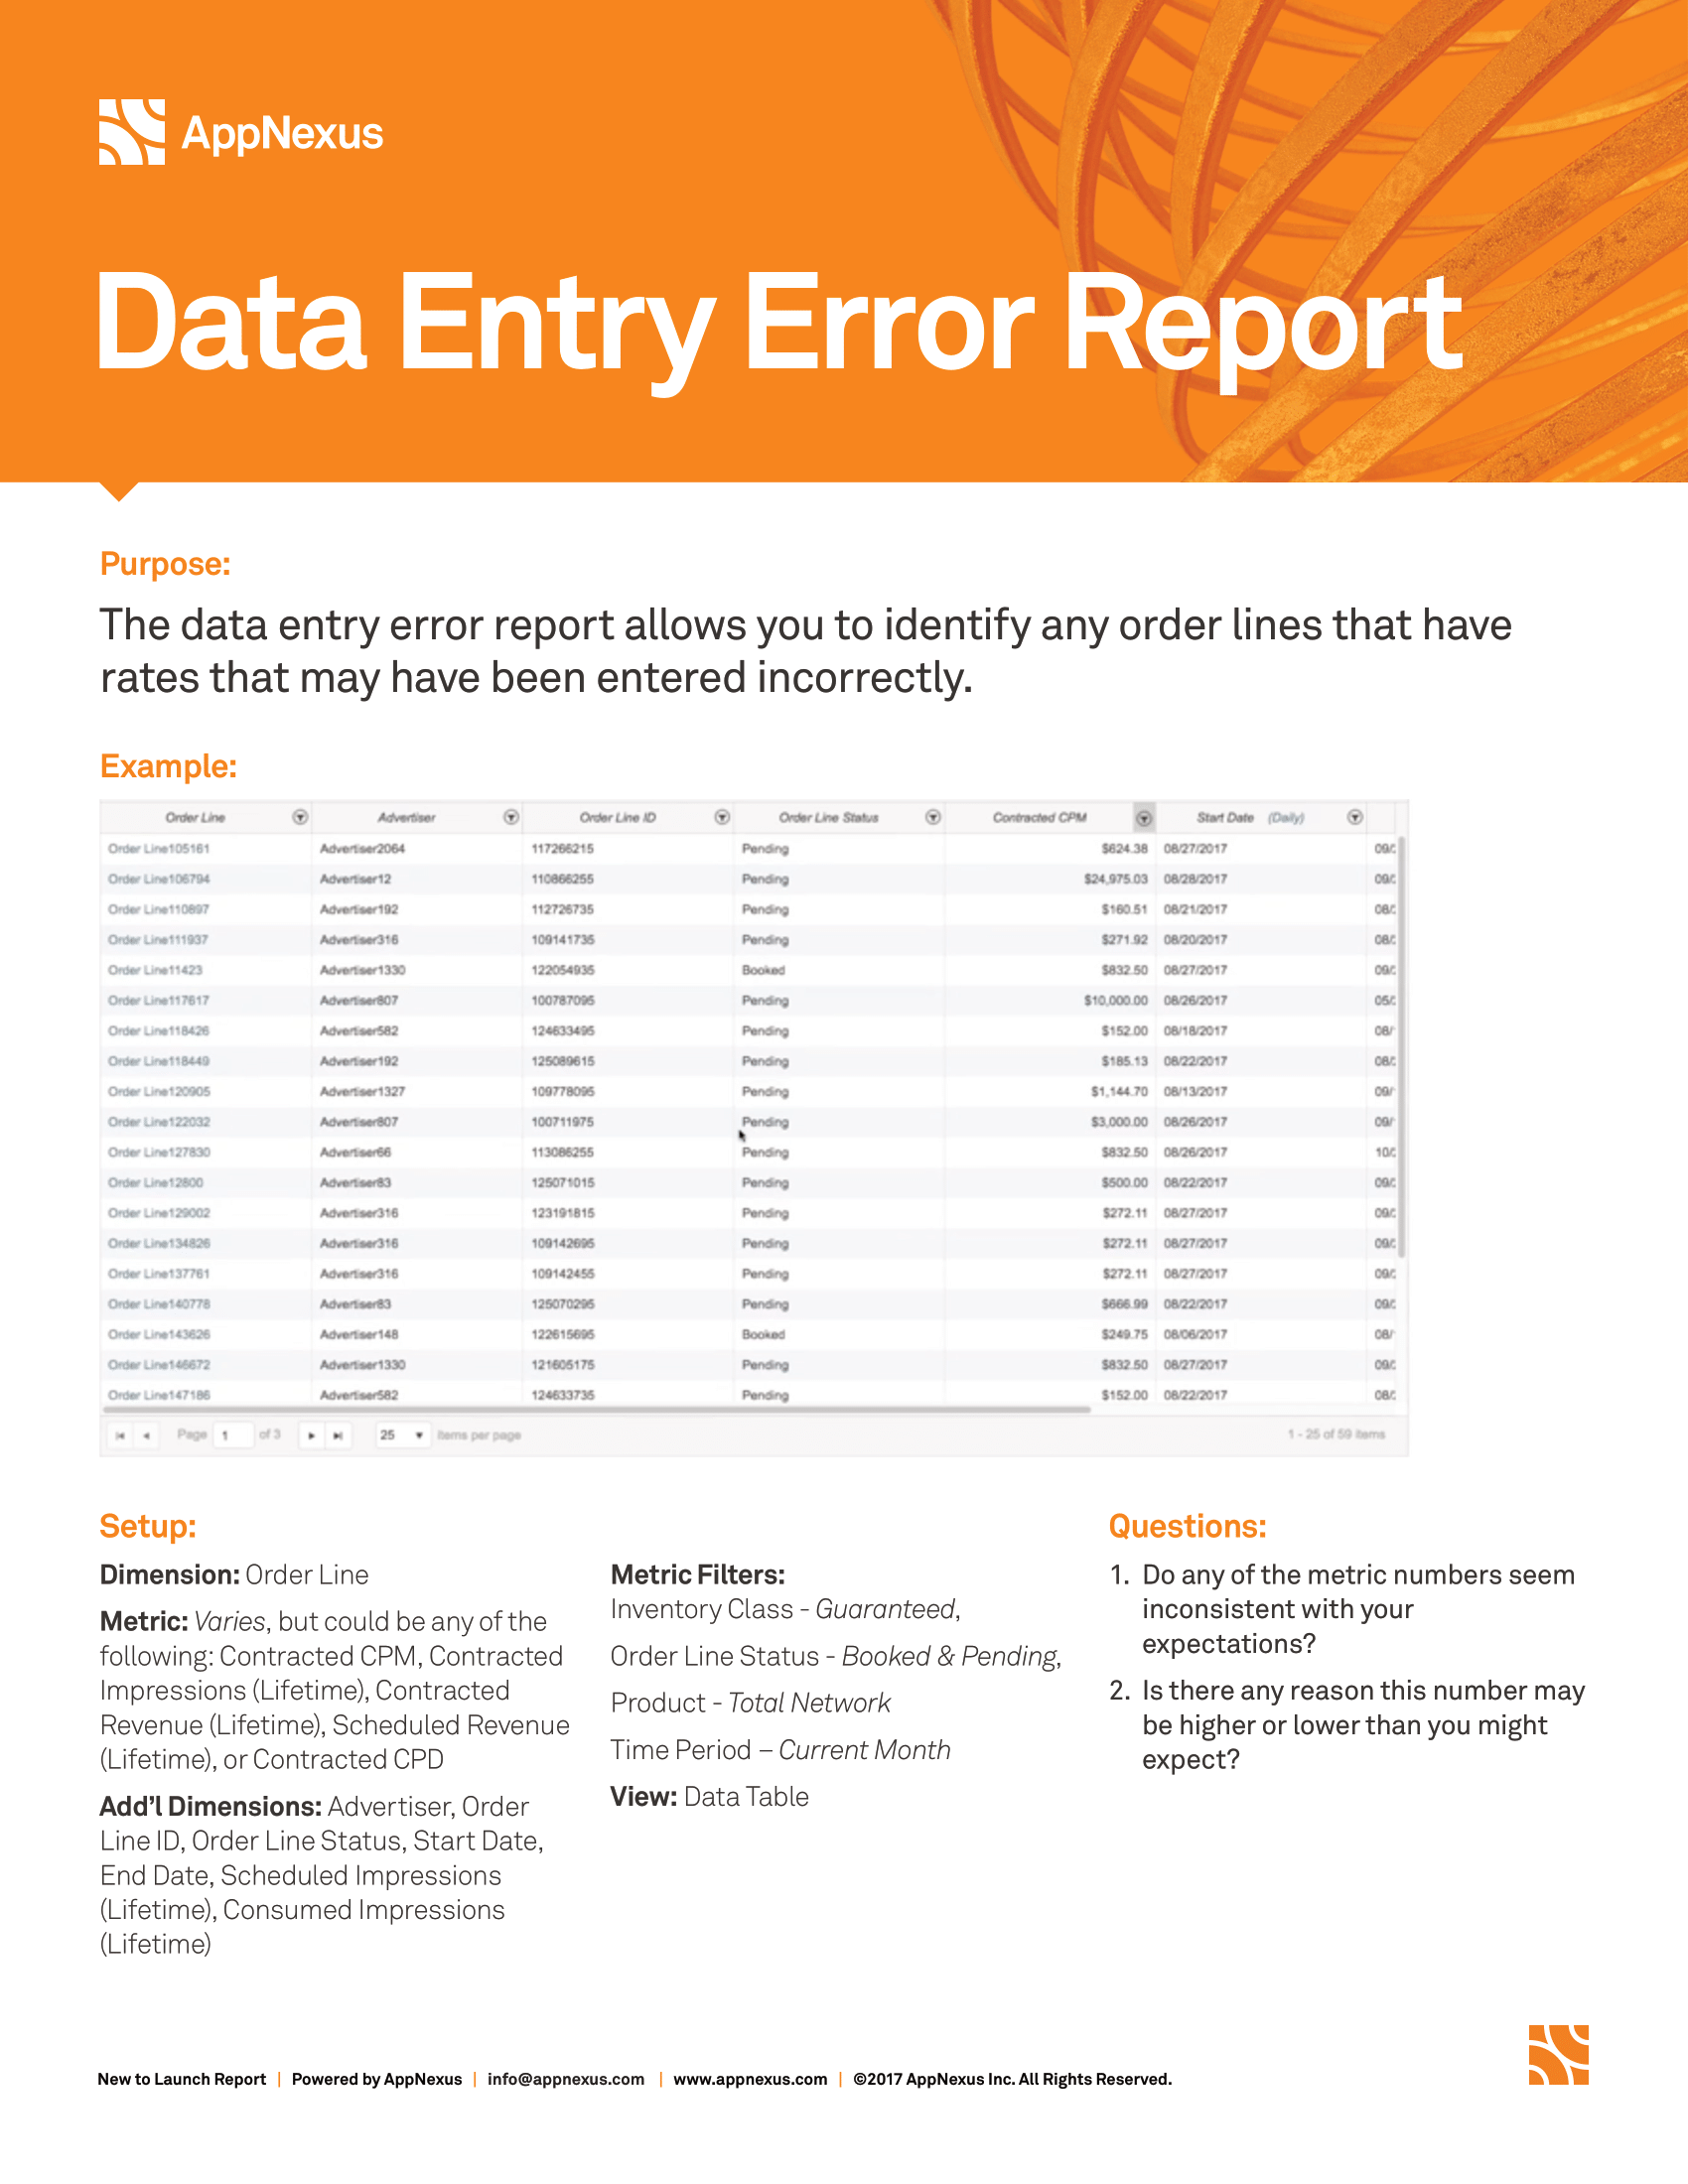 Screenshot that provides details about the Data Entry Error report.